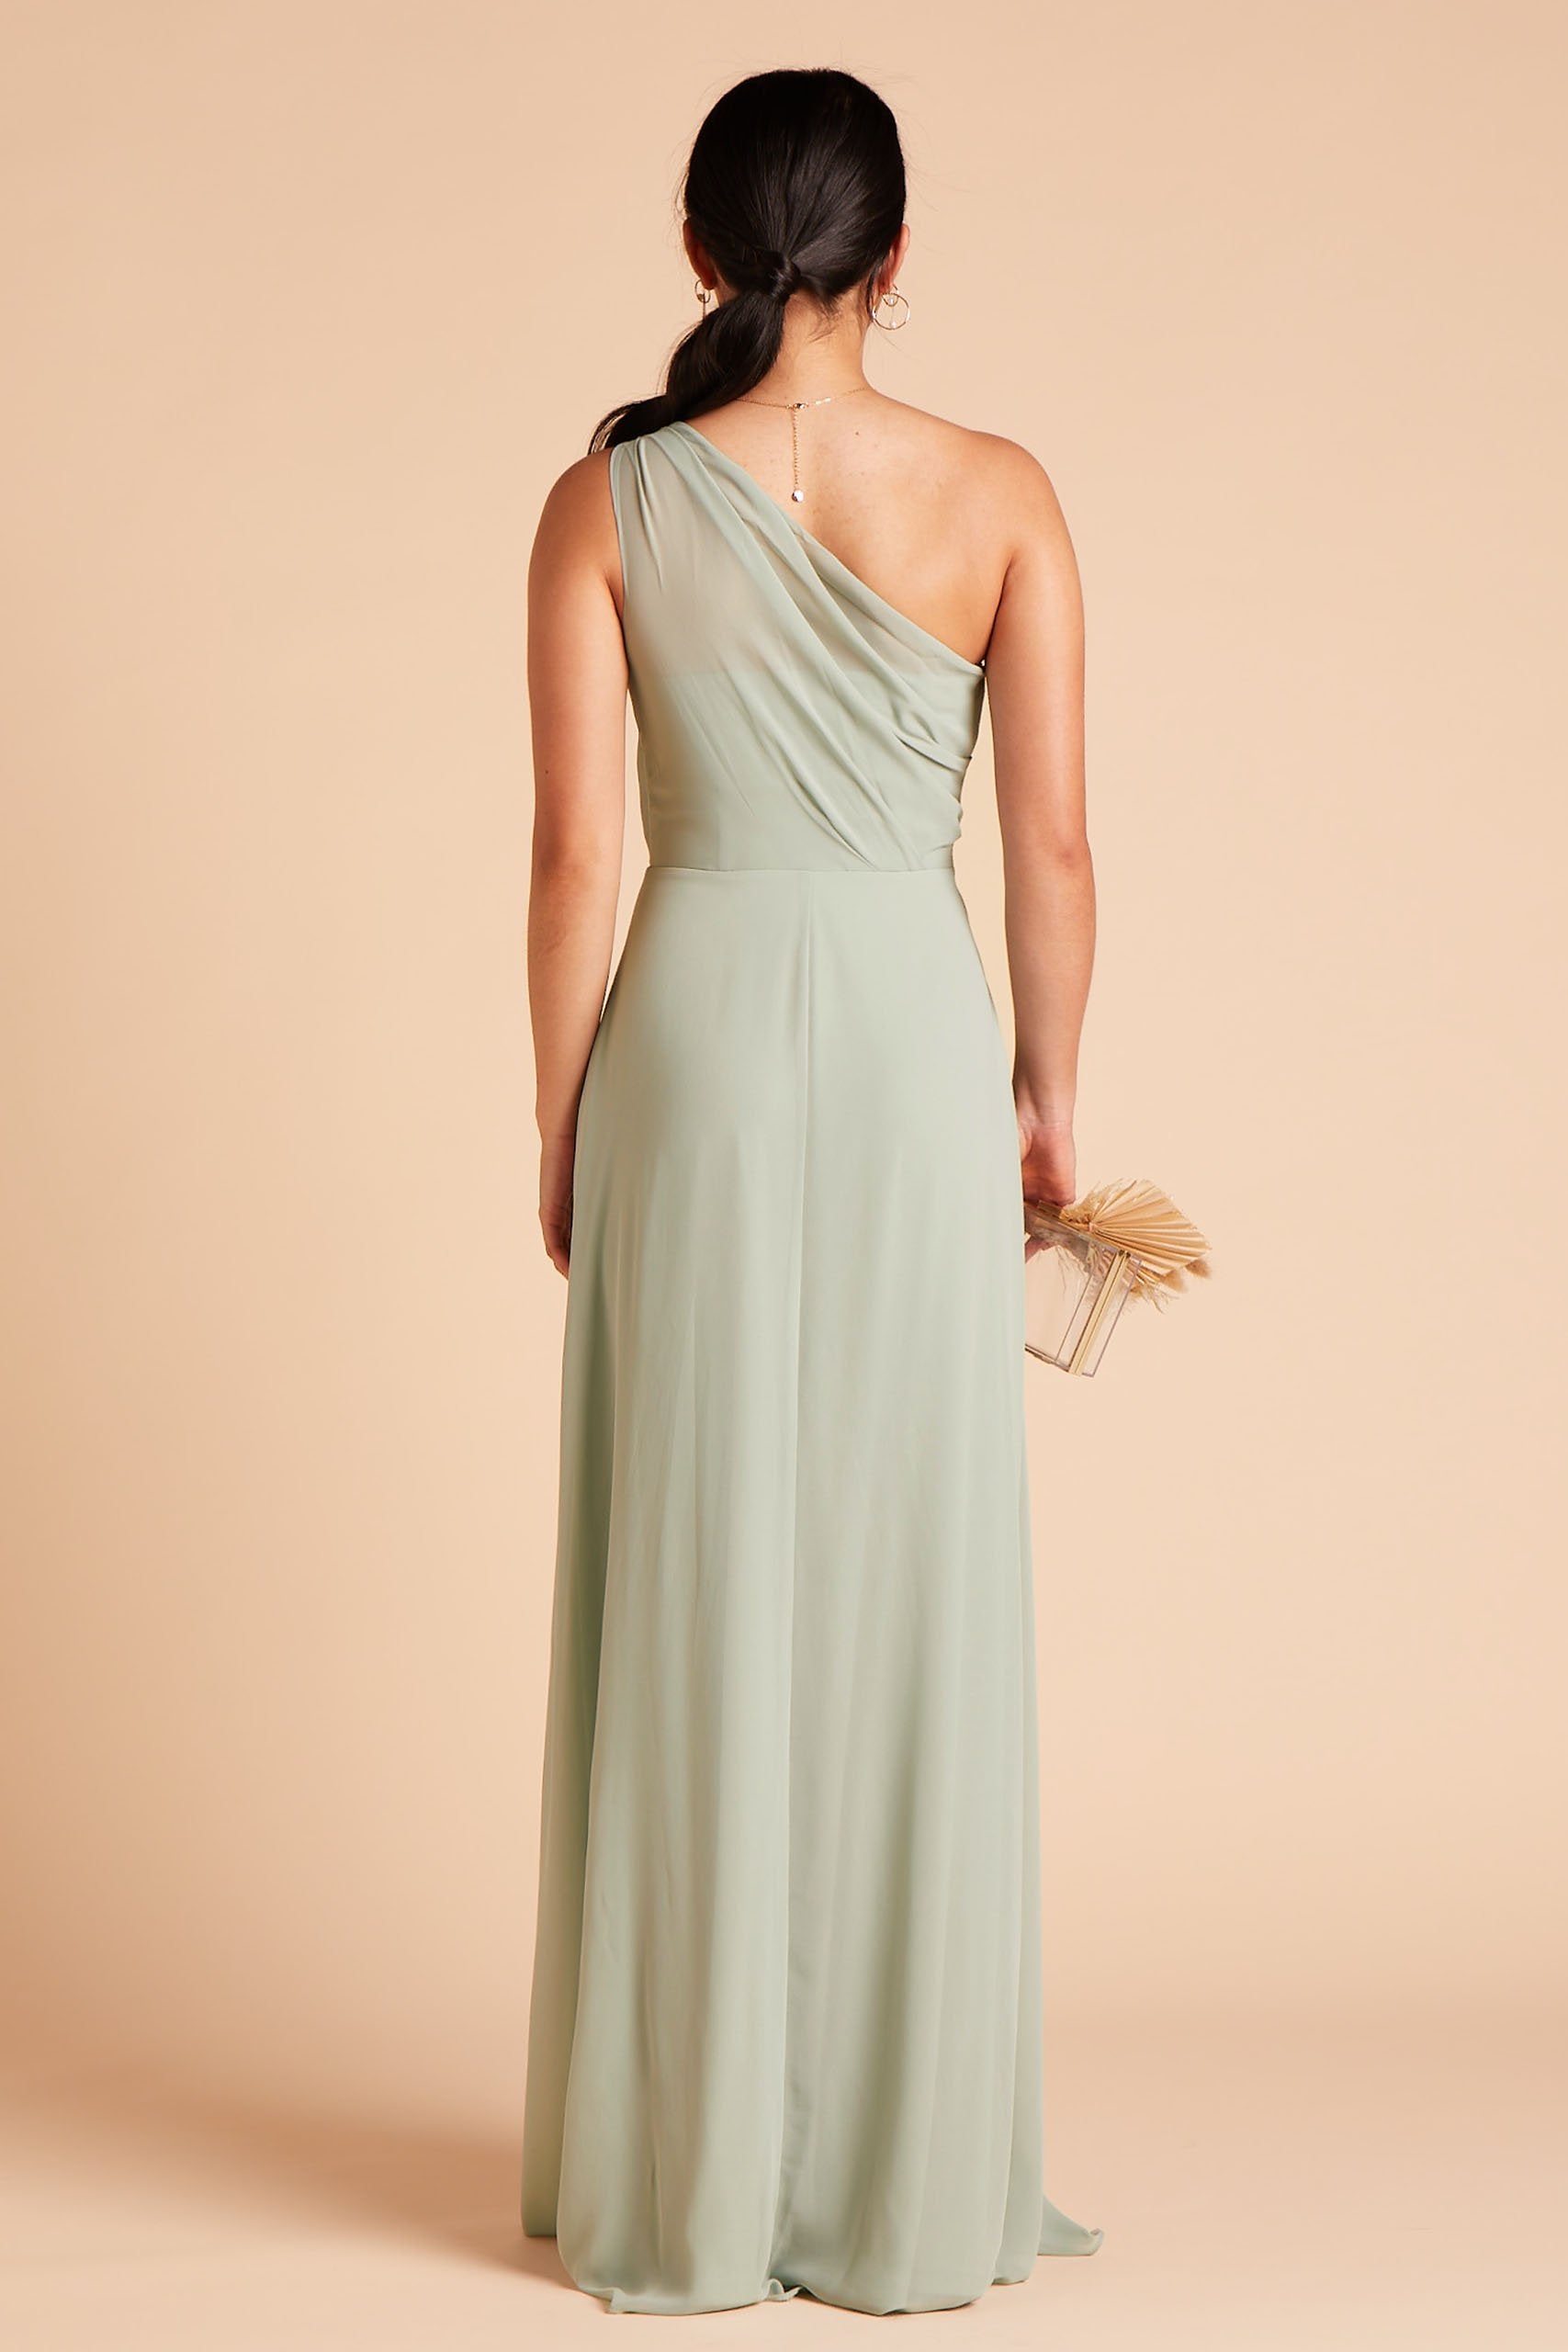 Back view of the Kira Dress in sage chiffon shows a slender model with a medium skin tone. The back of the dress has sheer chiffon fabric which creates a pleated Grecian one-shoulder neckline and bodice.